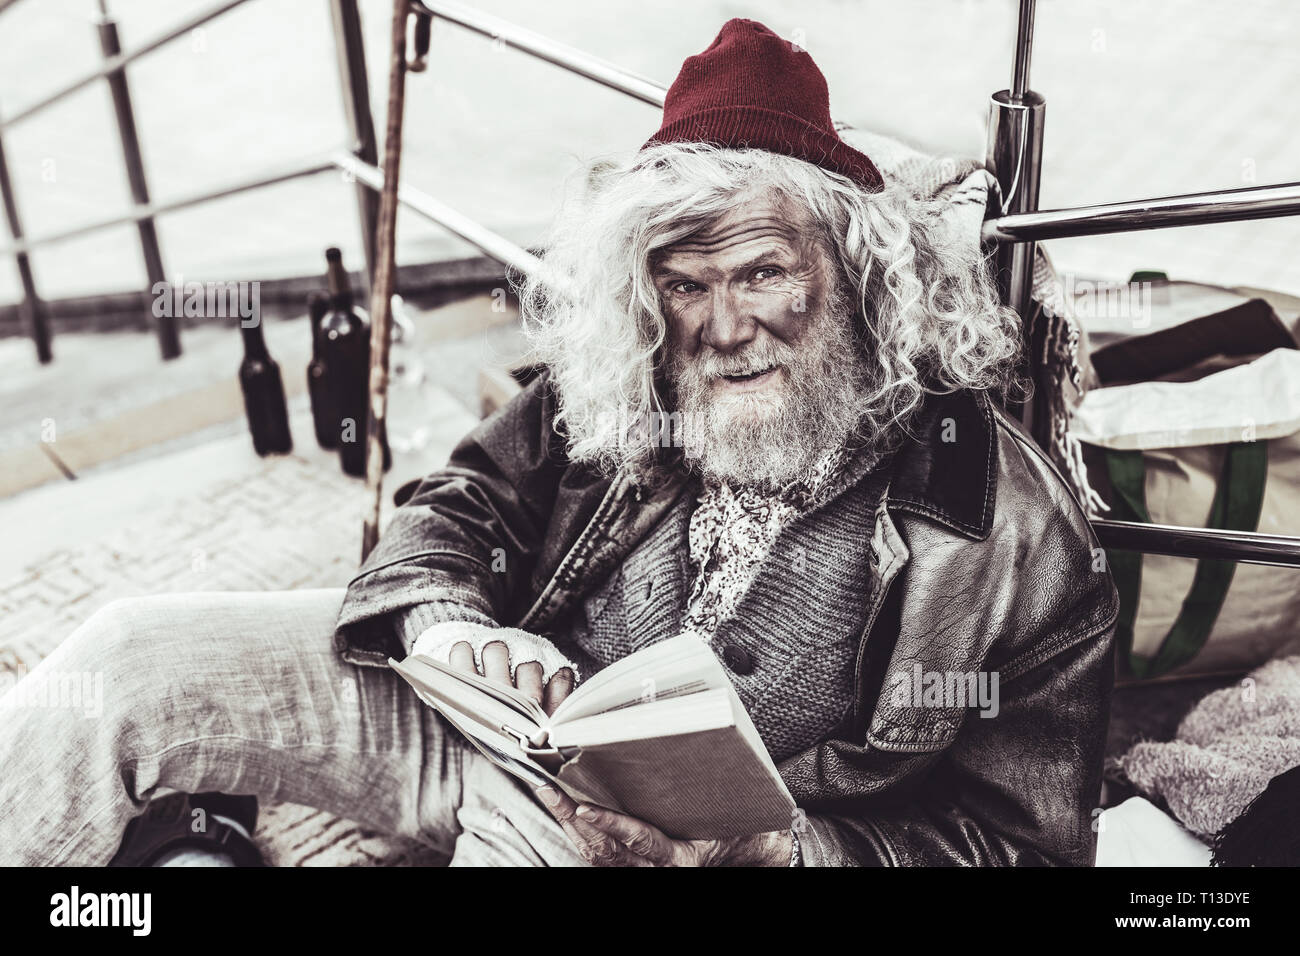 Mendicant retelling the plot of the book to the passerby while reading. Stock Photo